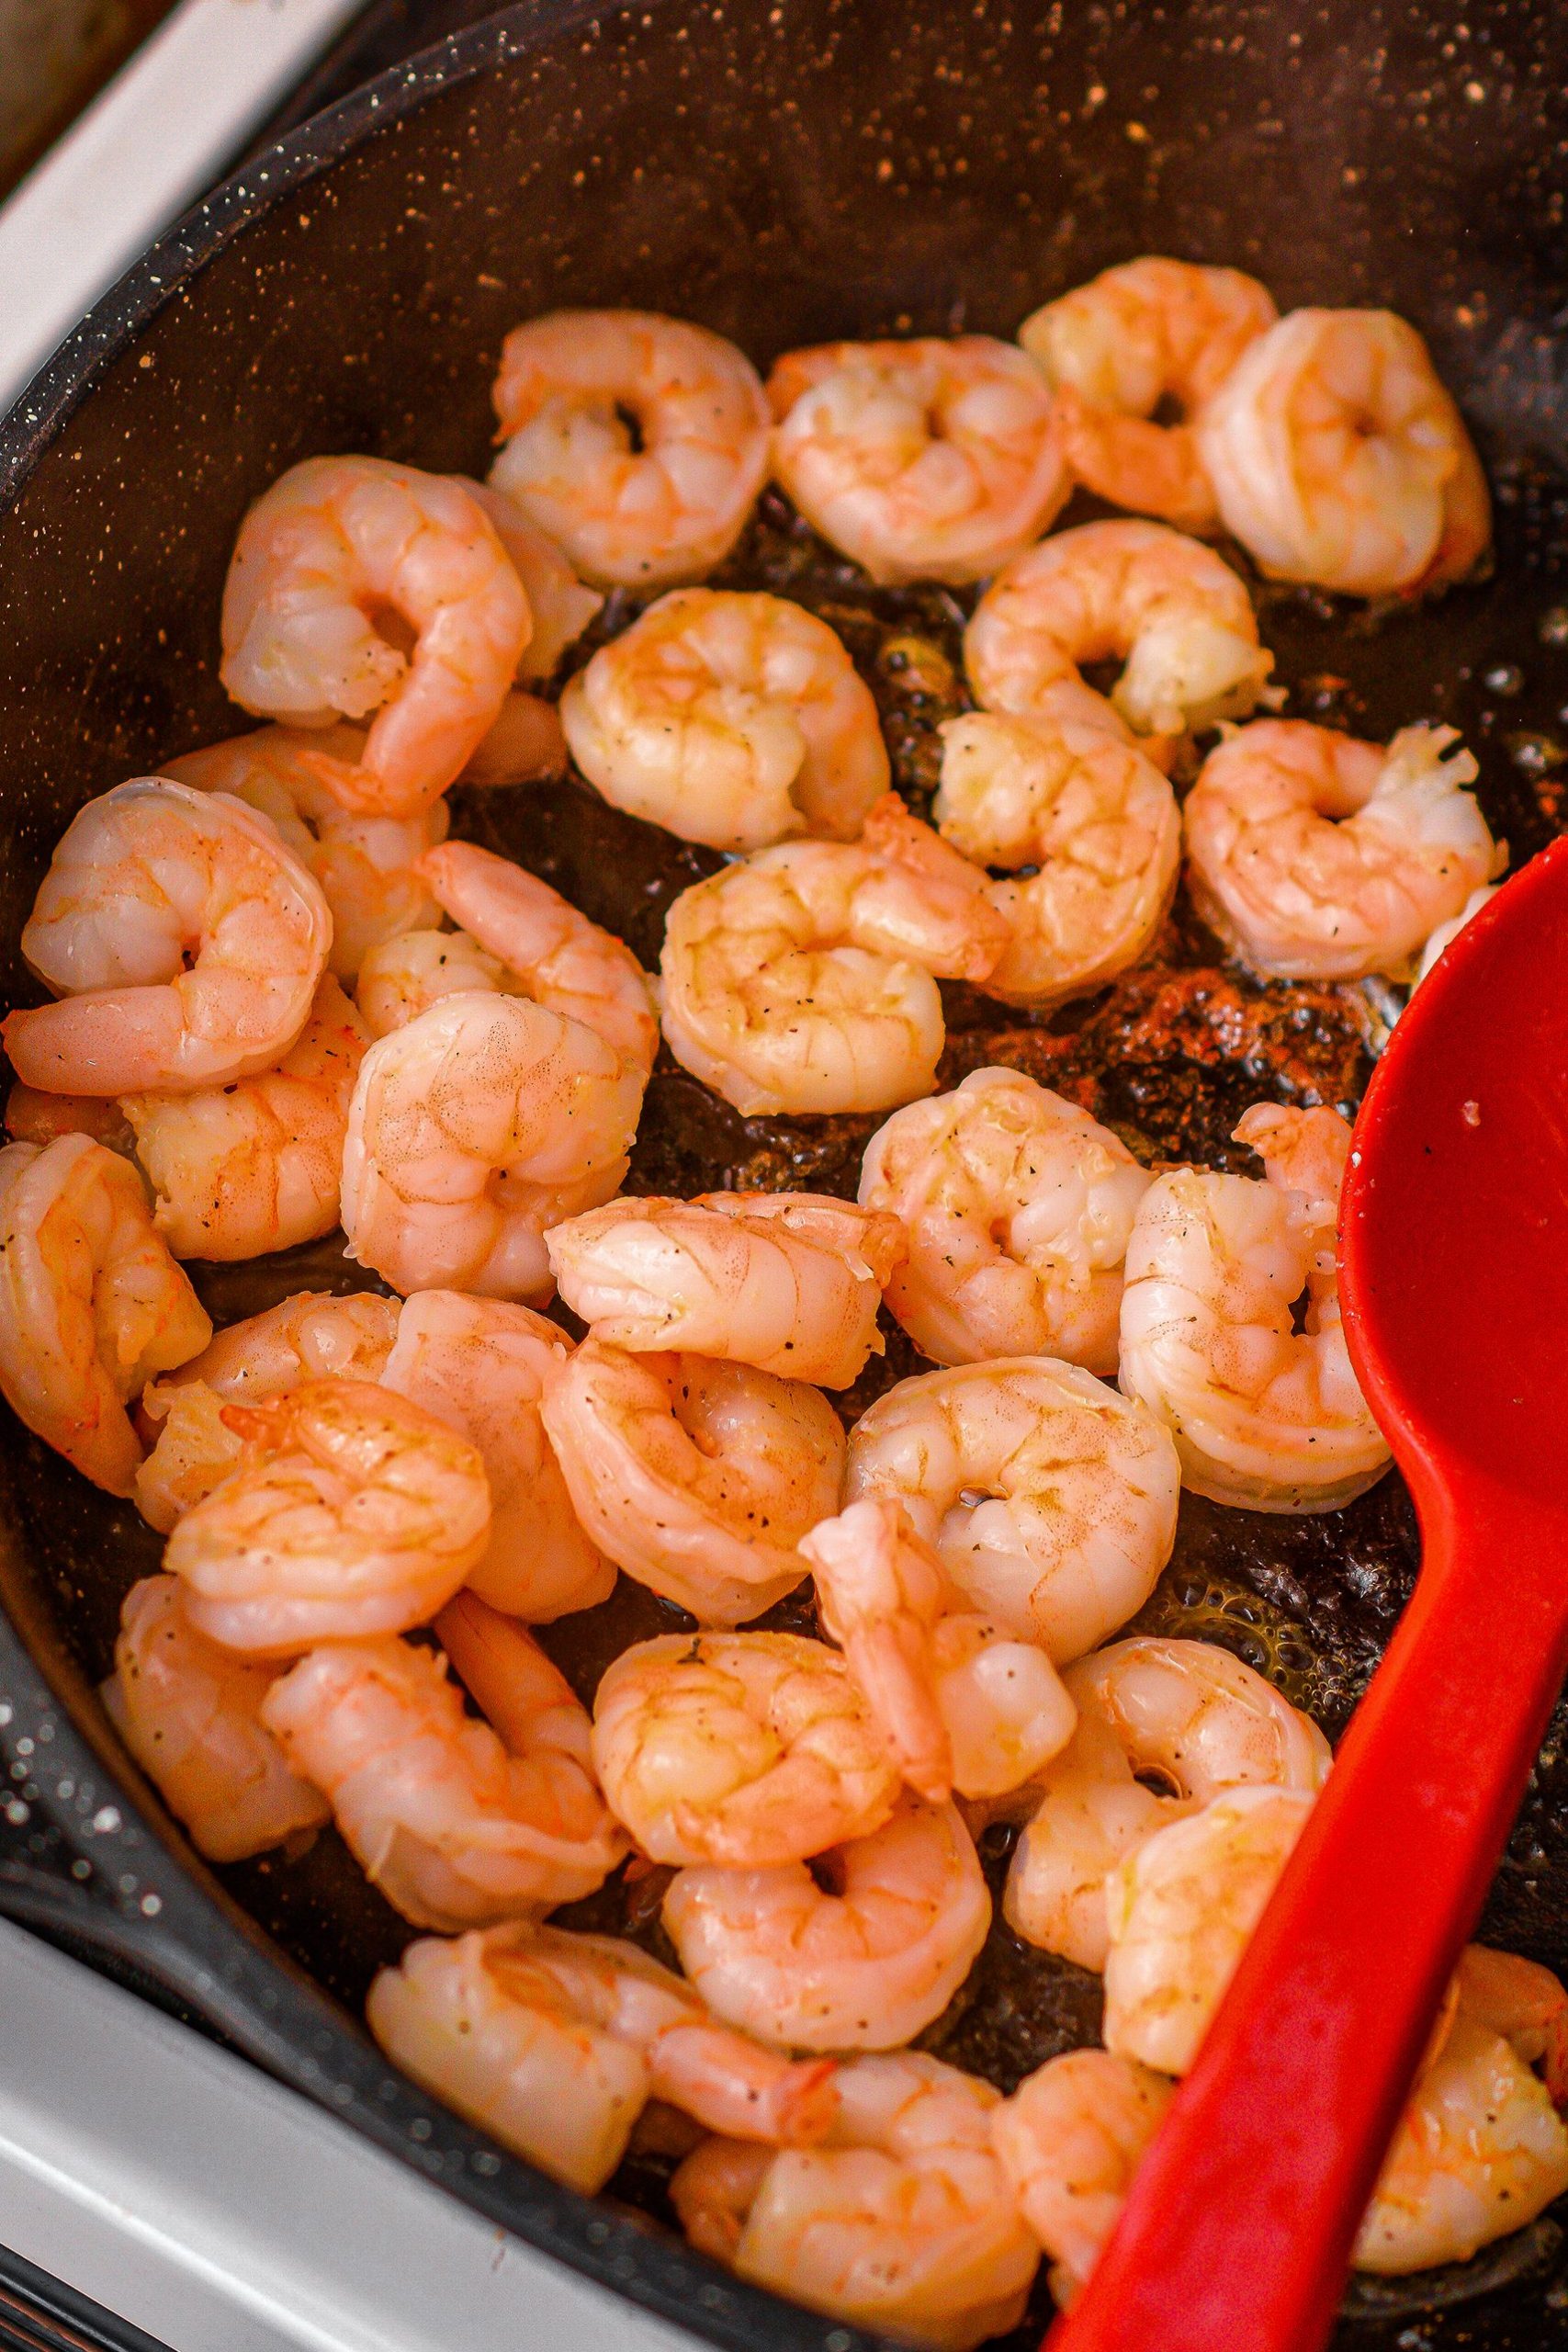 Add the shrimp to the skillet and season with salt and pepper. Saute until cooked through, then remove and set aside.